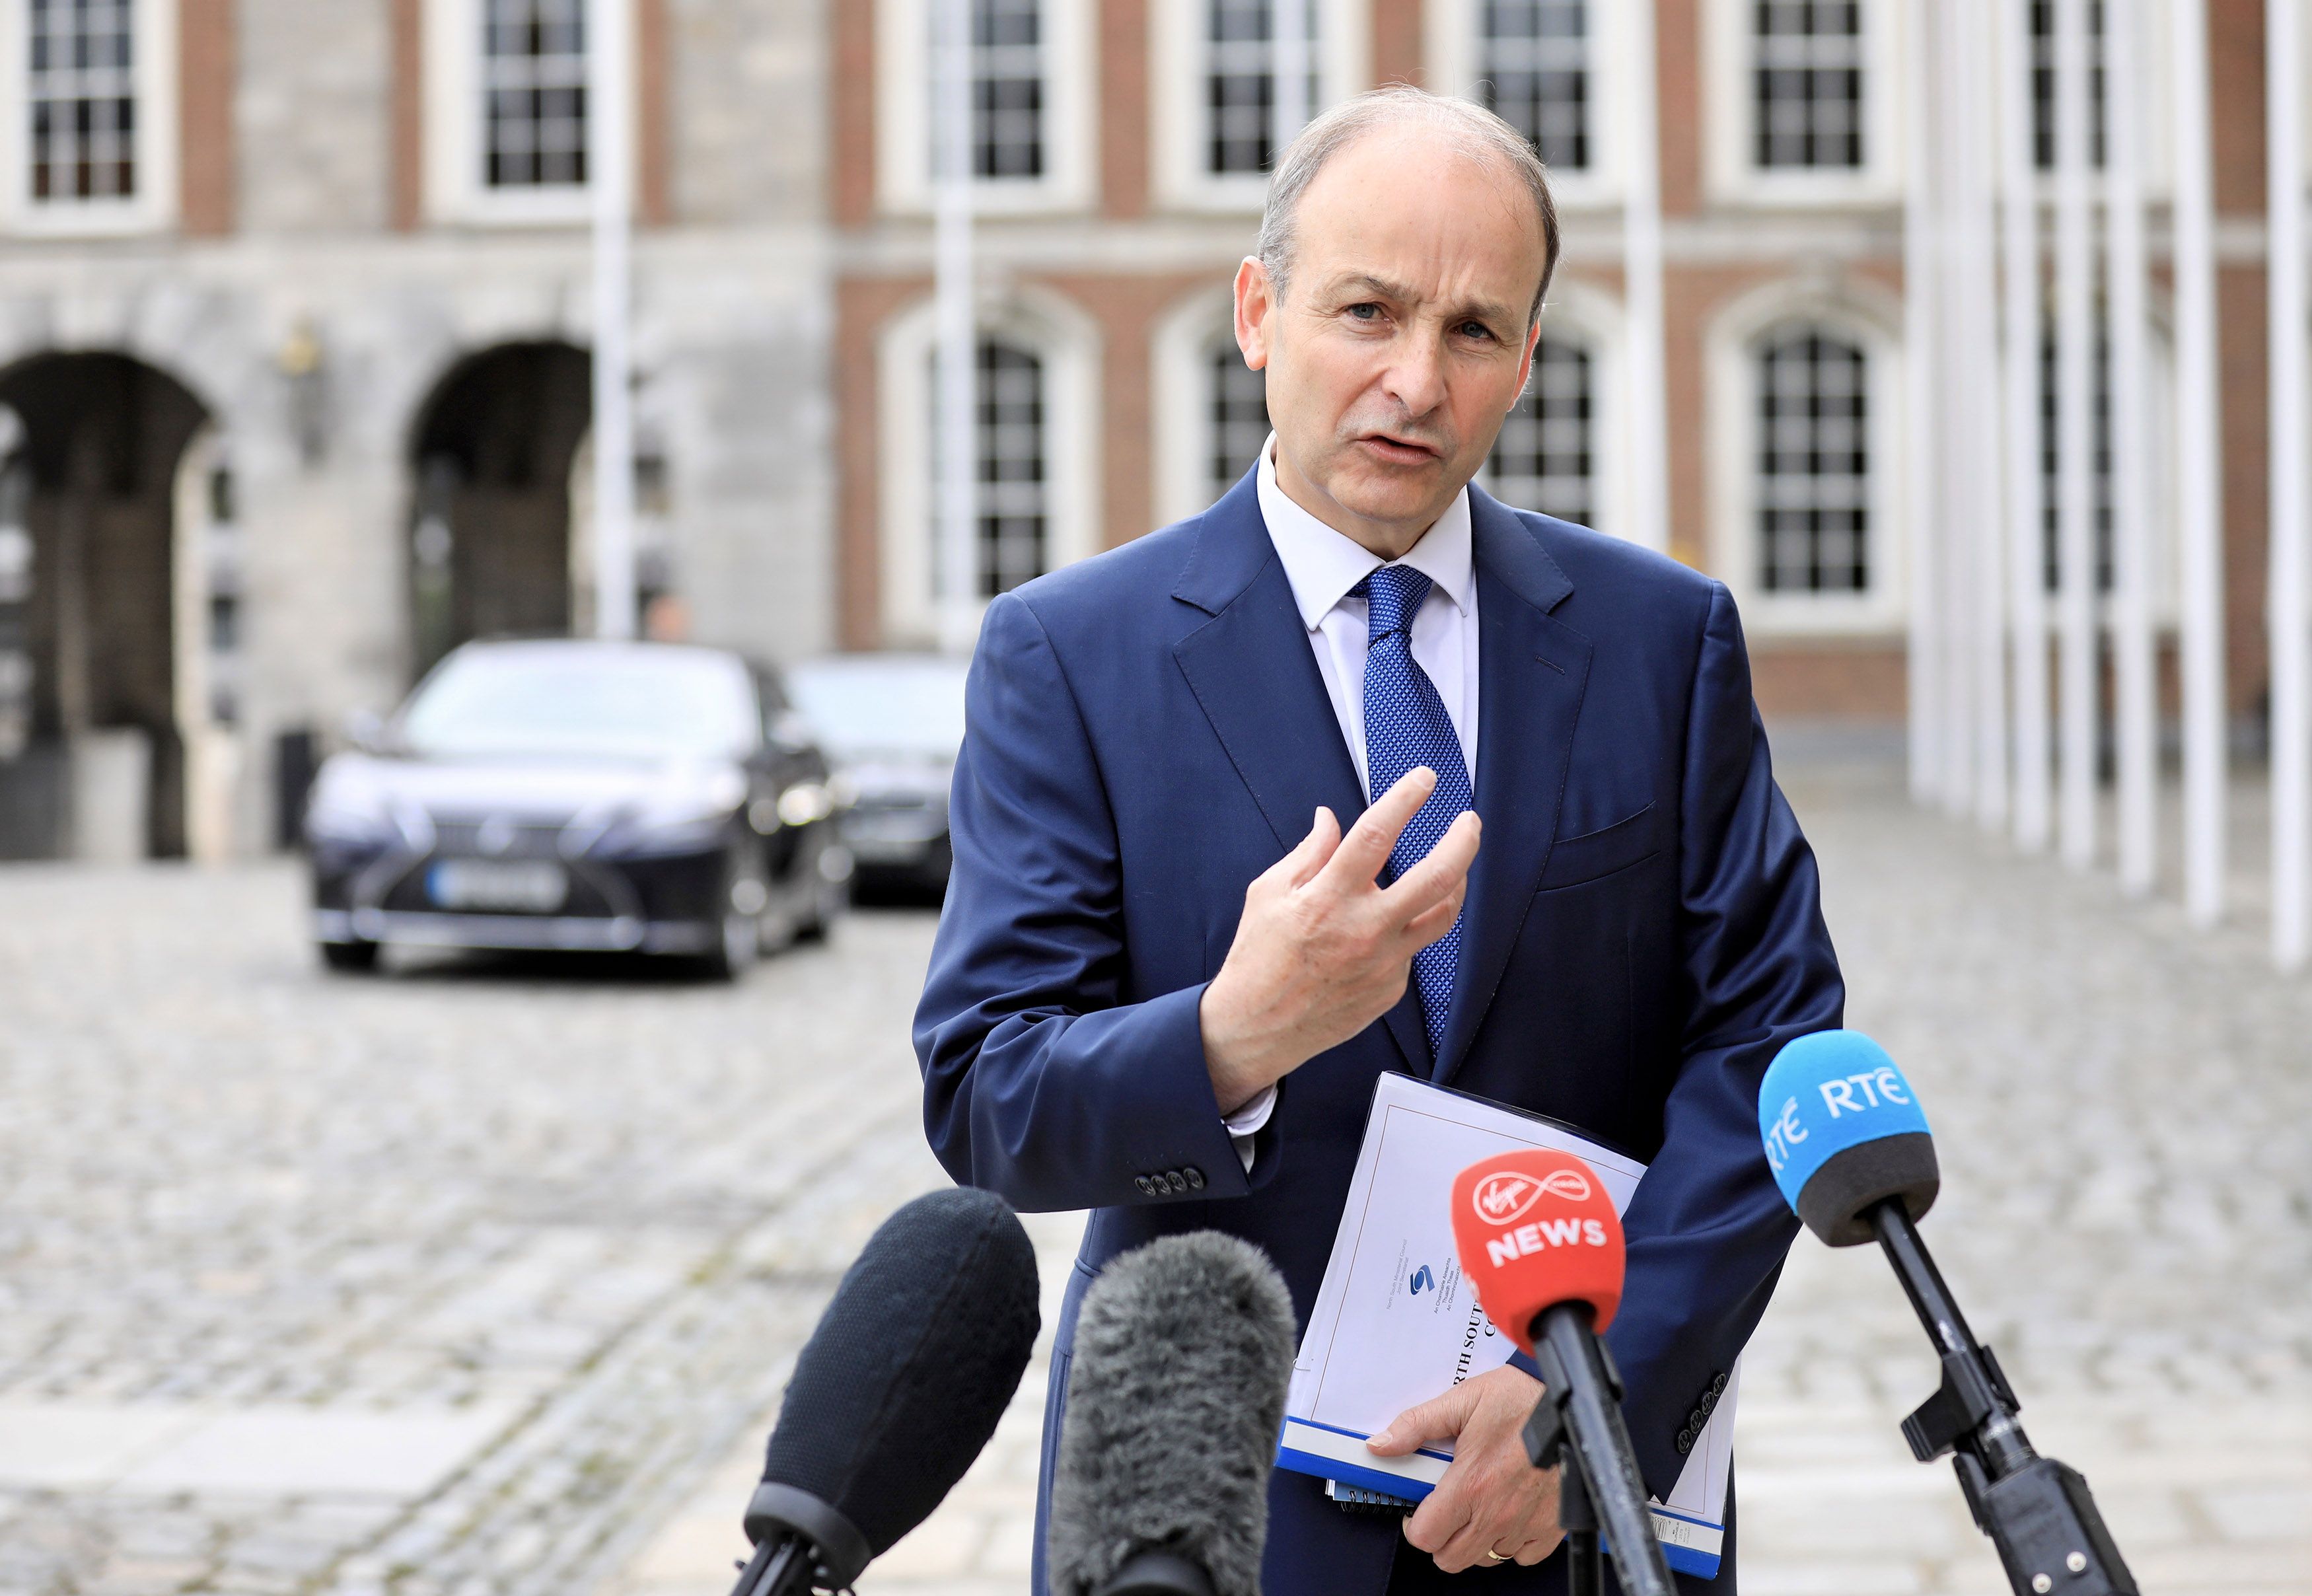 \'ANNOYED AND UPSET\': Taoiseach Micheál Martin says he understands the anger of people across the country